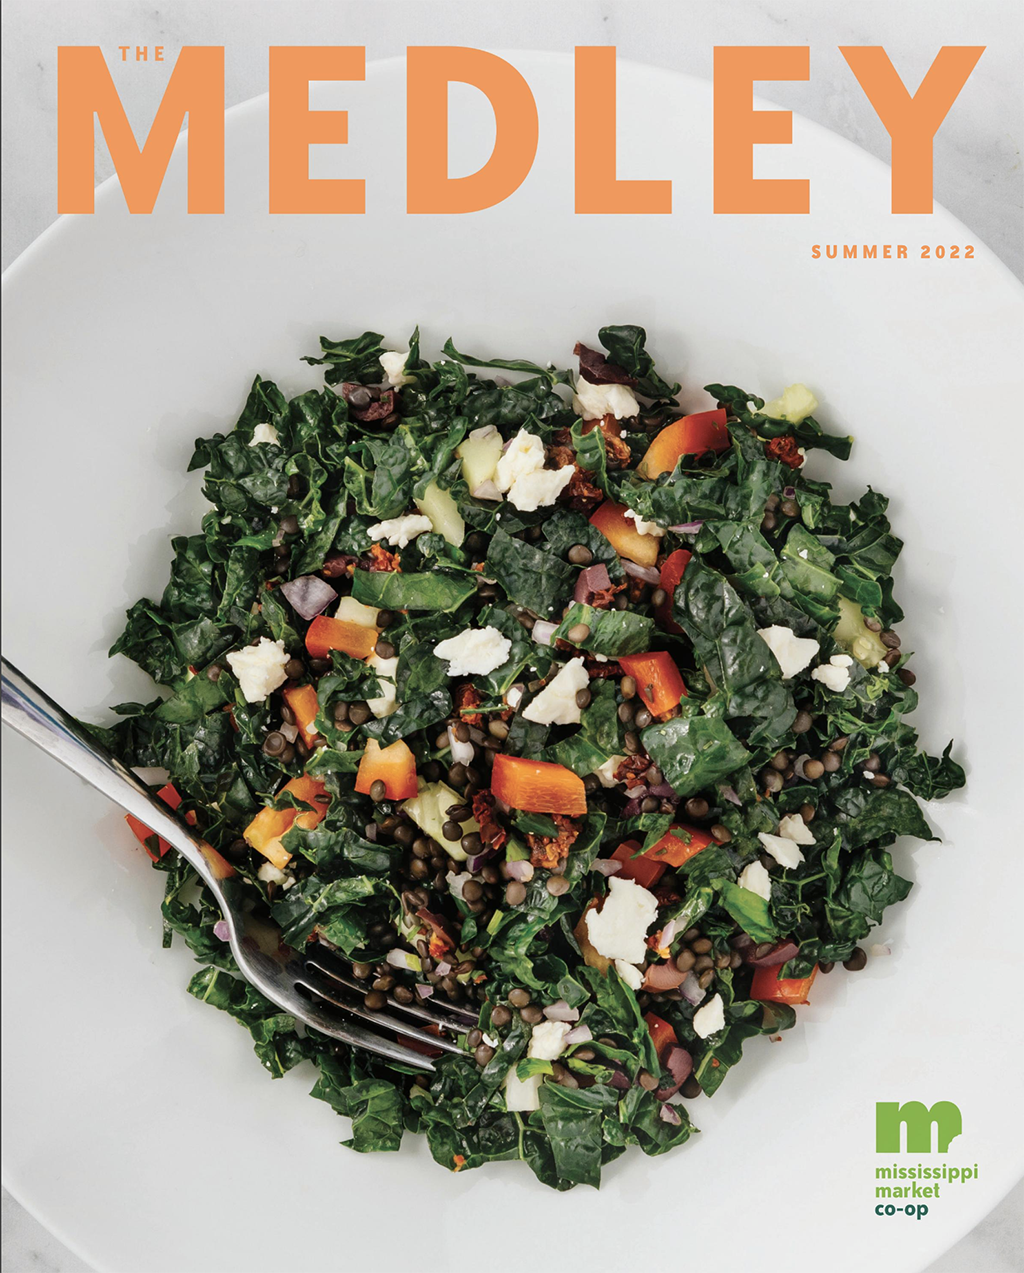 The Medley Cover Image summer 2022 issue Saint Paul, Minnesota based co-op